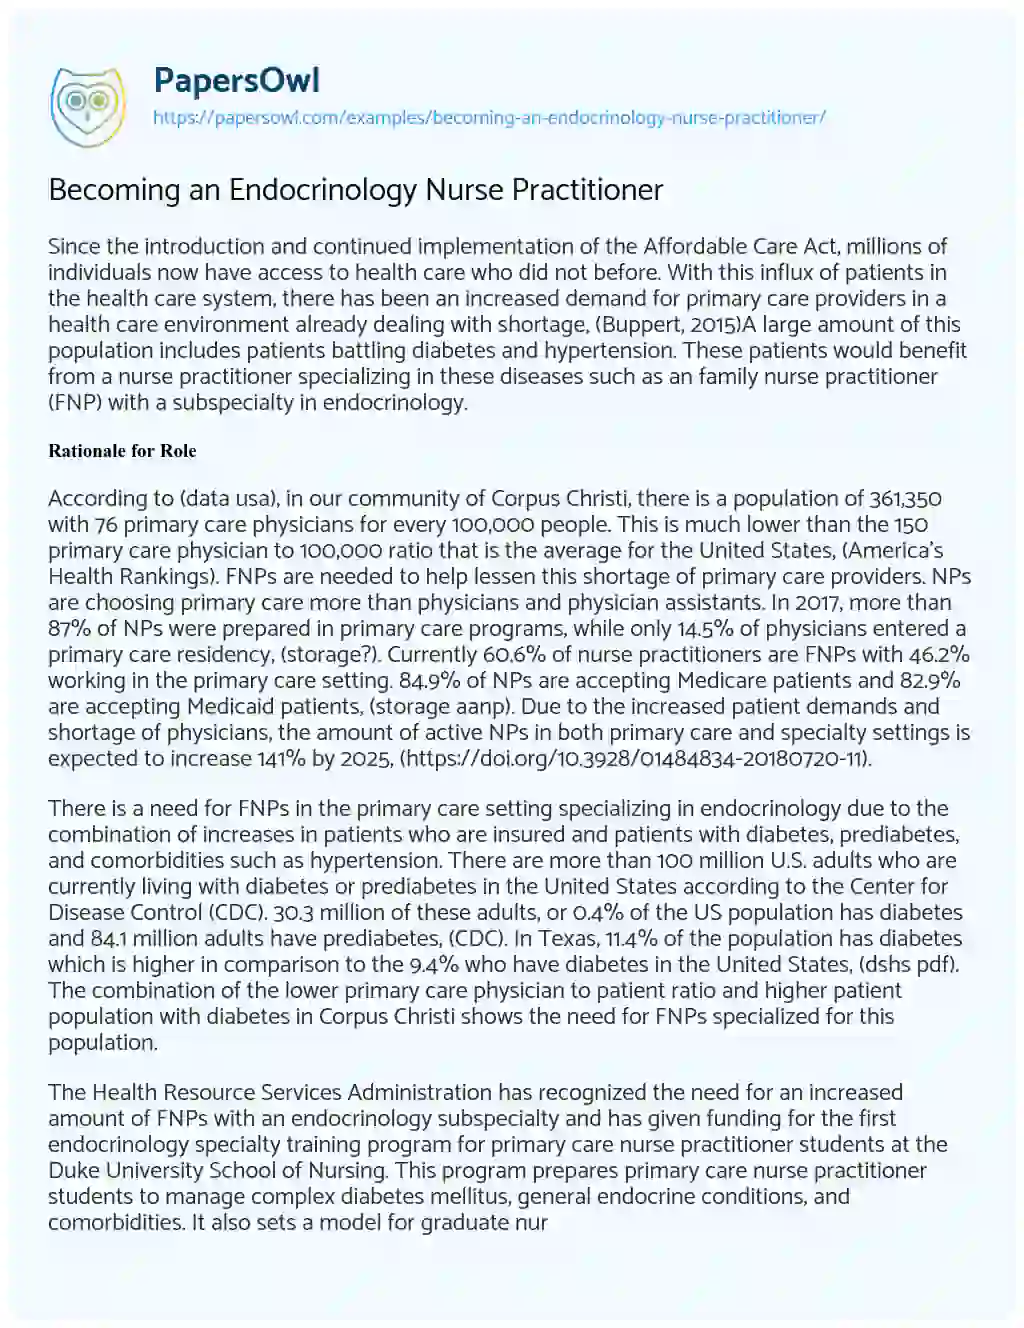 Becoming an Endocrinology Nurse Practitioner essay